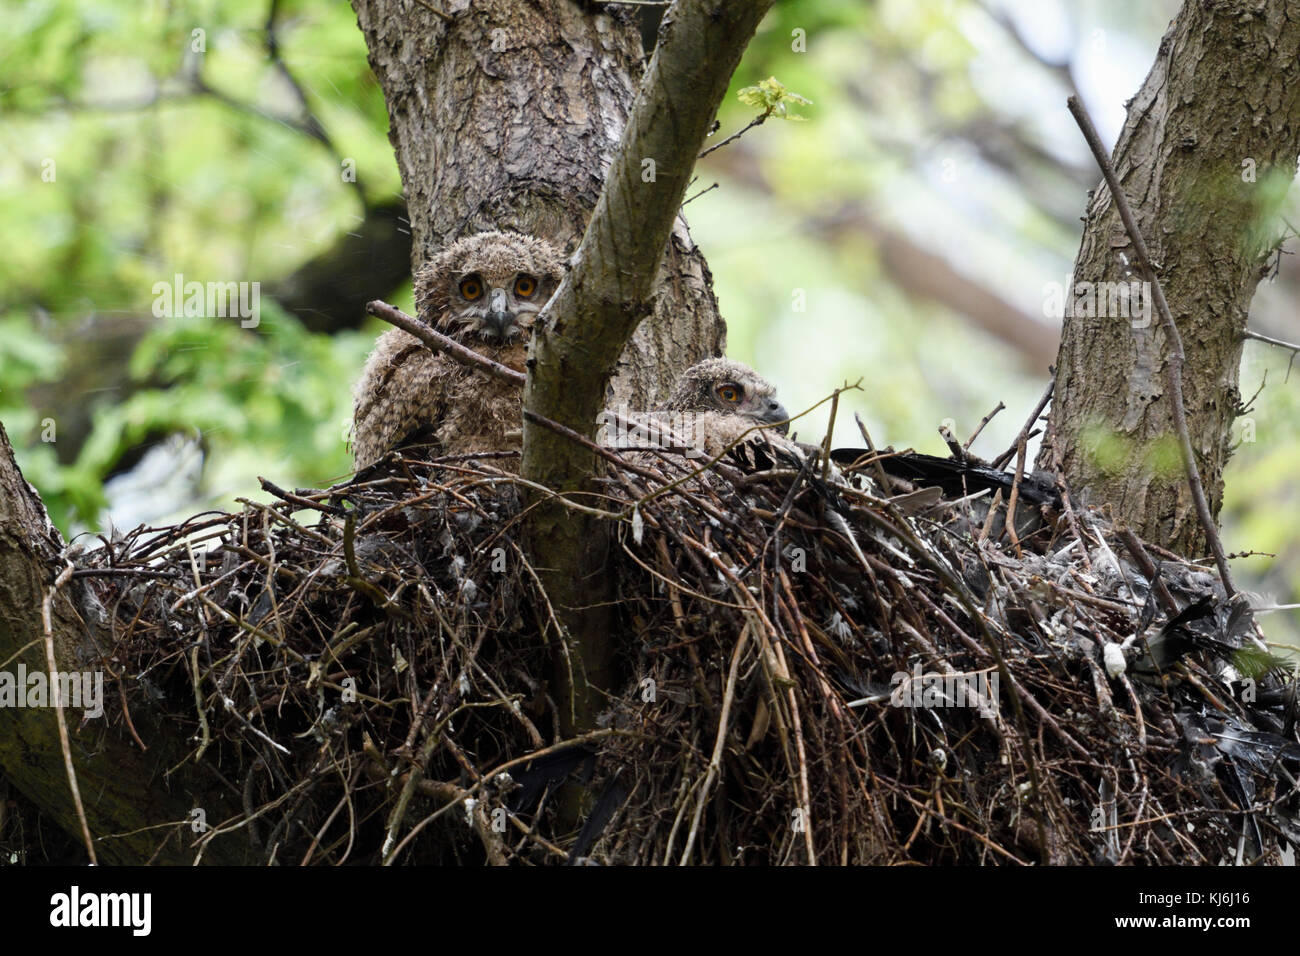 Eurasian Eagle Owl ( Bubo bubo ) offspring, two young chicks, owlets, perched in their elevated nest high up in a tree, wildlife, Europe. Stock Photo